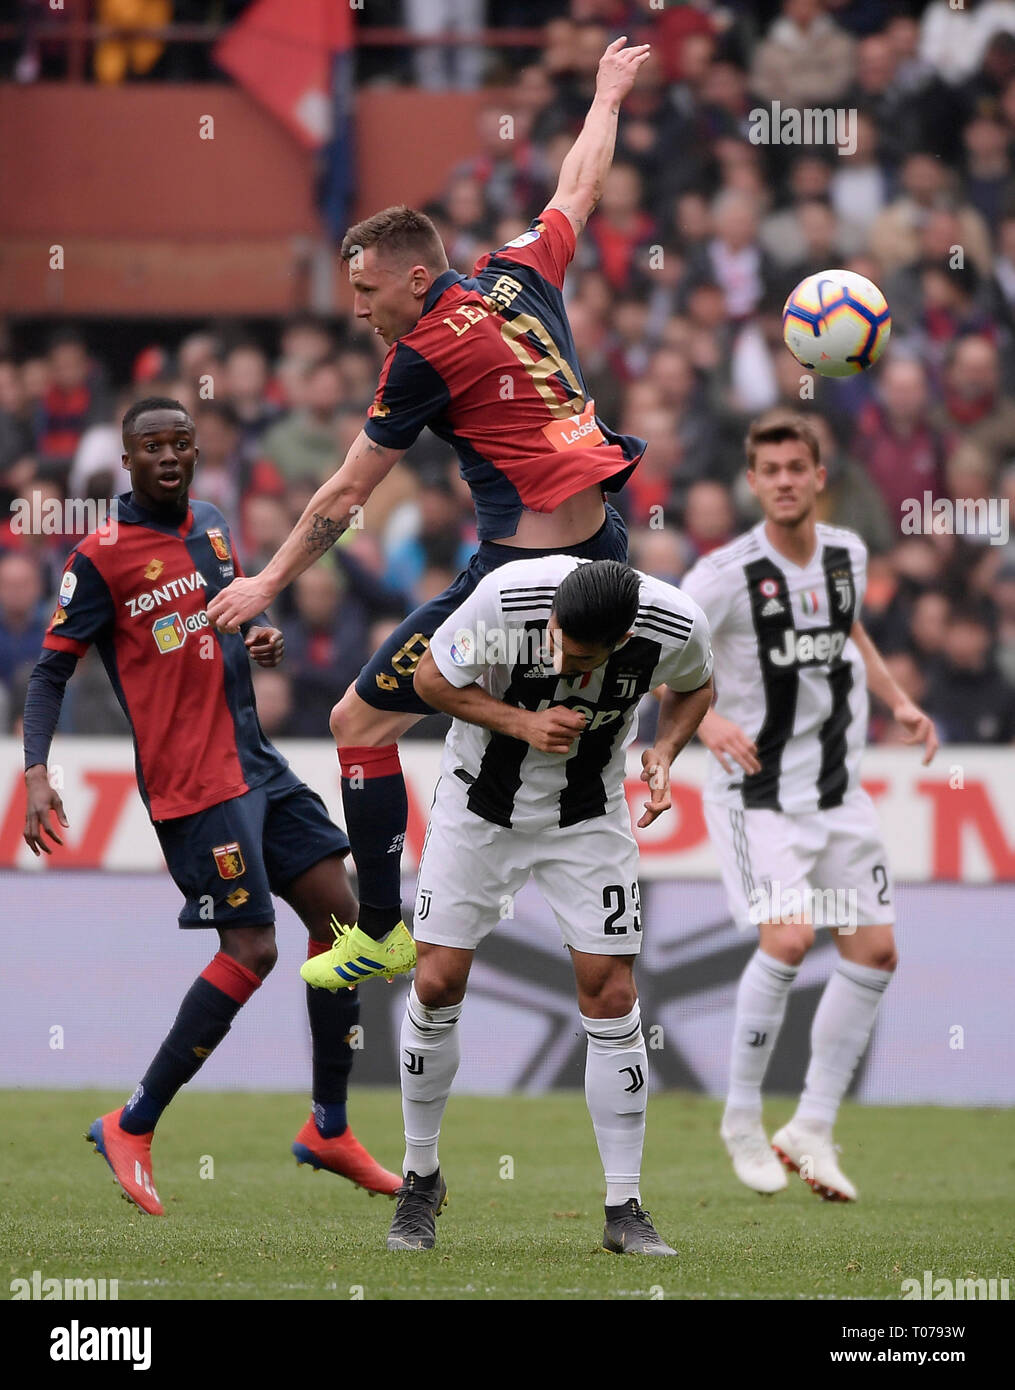 Genoa, Italy. 17th Mar, 2019. Juventus' Emre Can (C bottom) vies with Genoa's Lukas Lerager (C top) during an Italian Serie A match in Genoa, Italy, March 17, 2019. Credit: Alberto Lingria/Xinhua/Alamy Live News Stock Photo